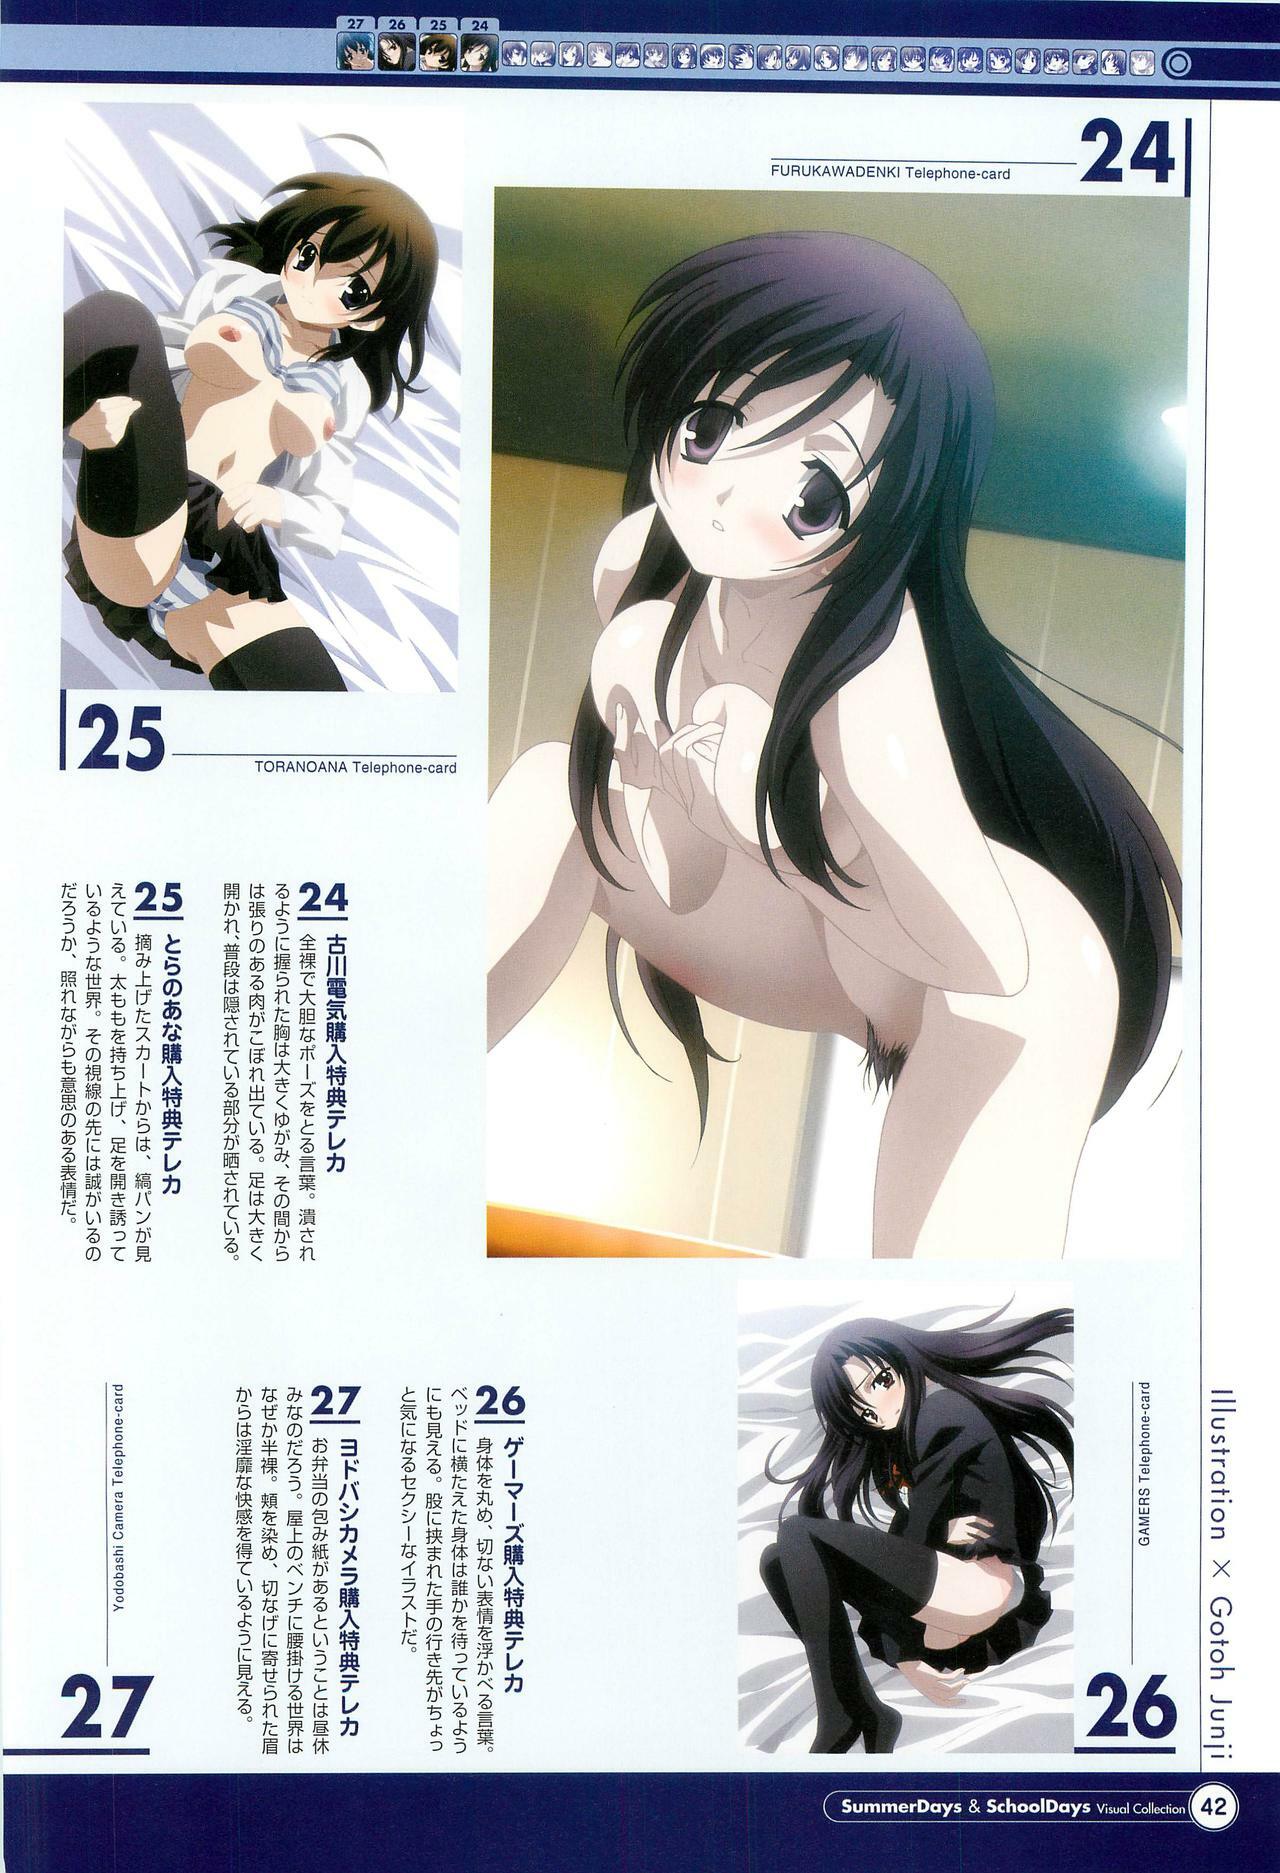 SummerDays & School Days Visual Collection page 44 full